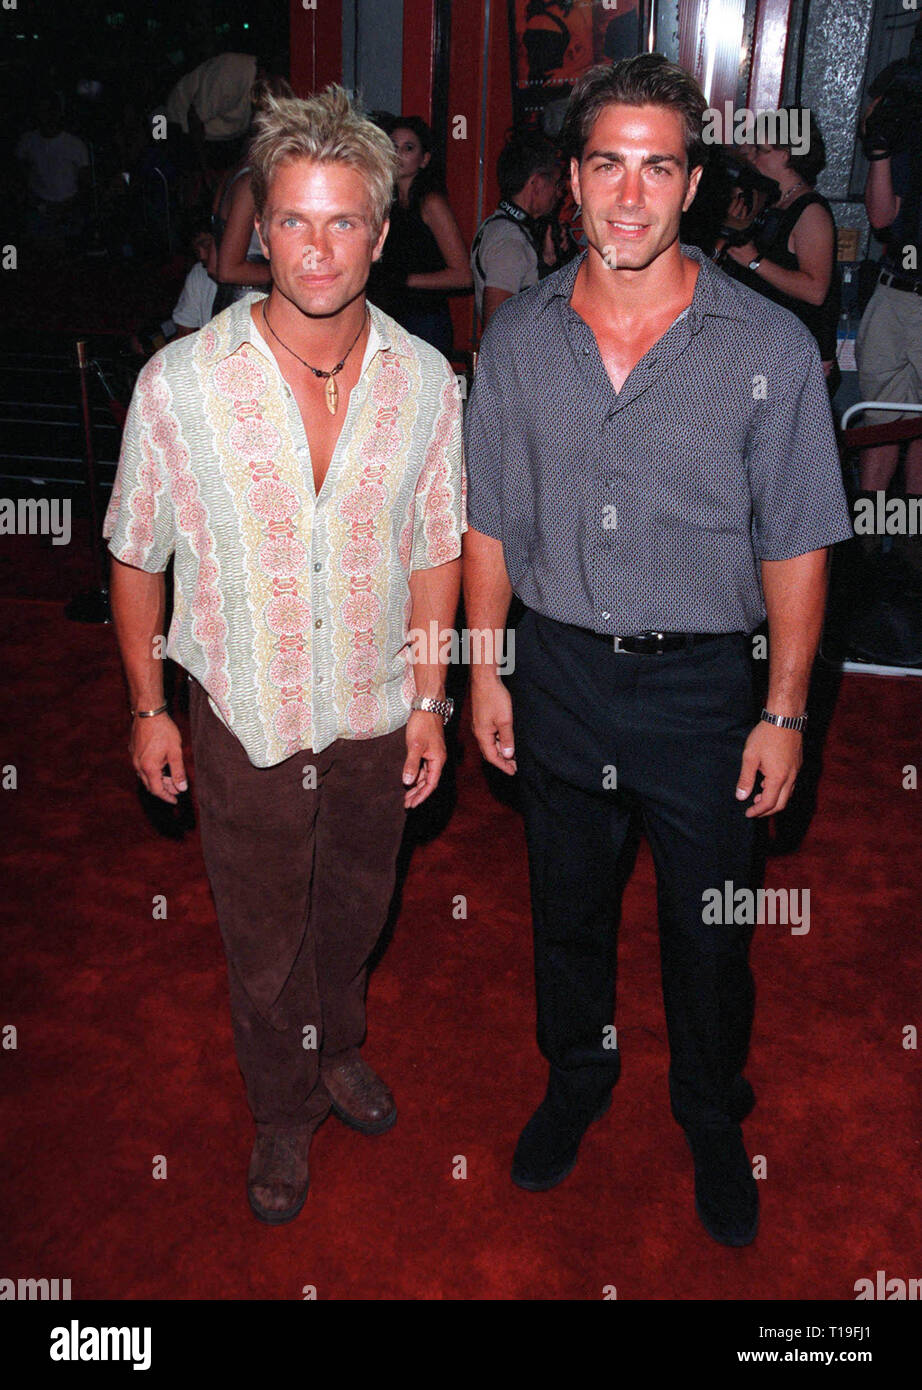 LOS ANGELES, CA - August 24, 1998: Baywatch stars MICHAEL BERGIN (right) & DAVID CHOKACHI at the world premiere,  in Hollywood, of '54.' The movie is based on New York's Studio 54 Disco. Stock Photo